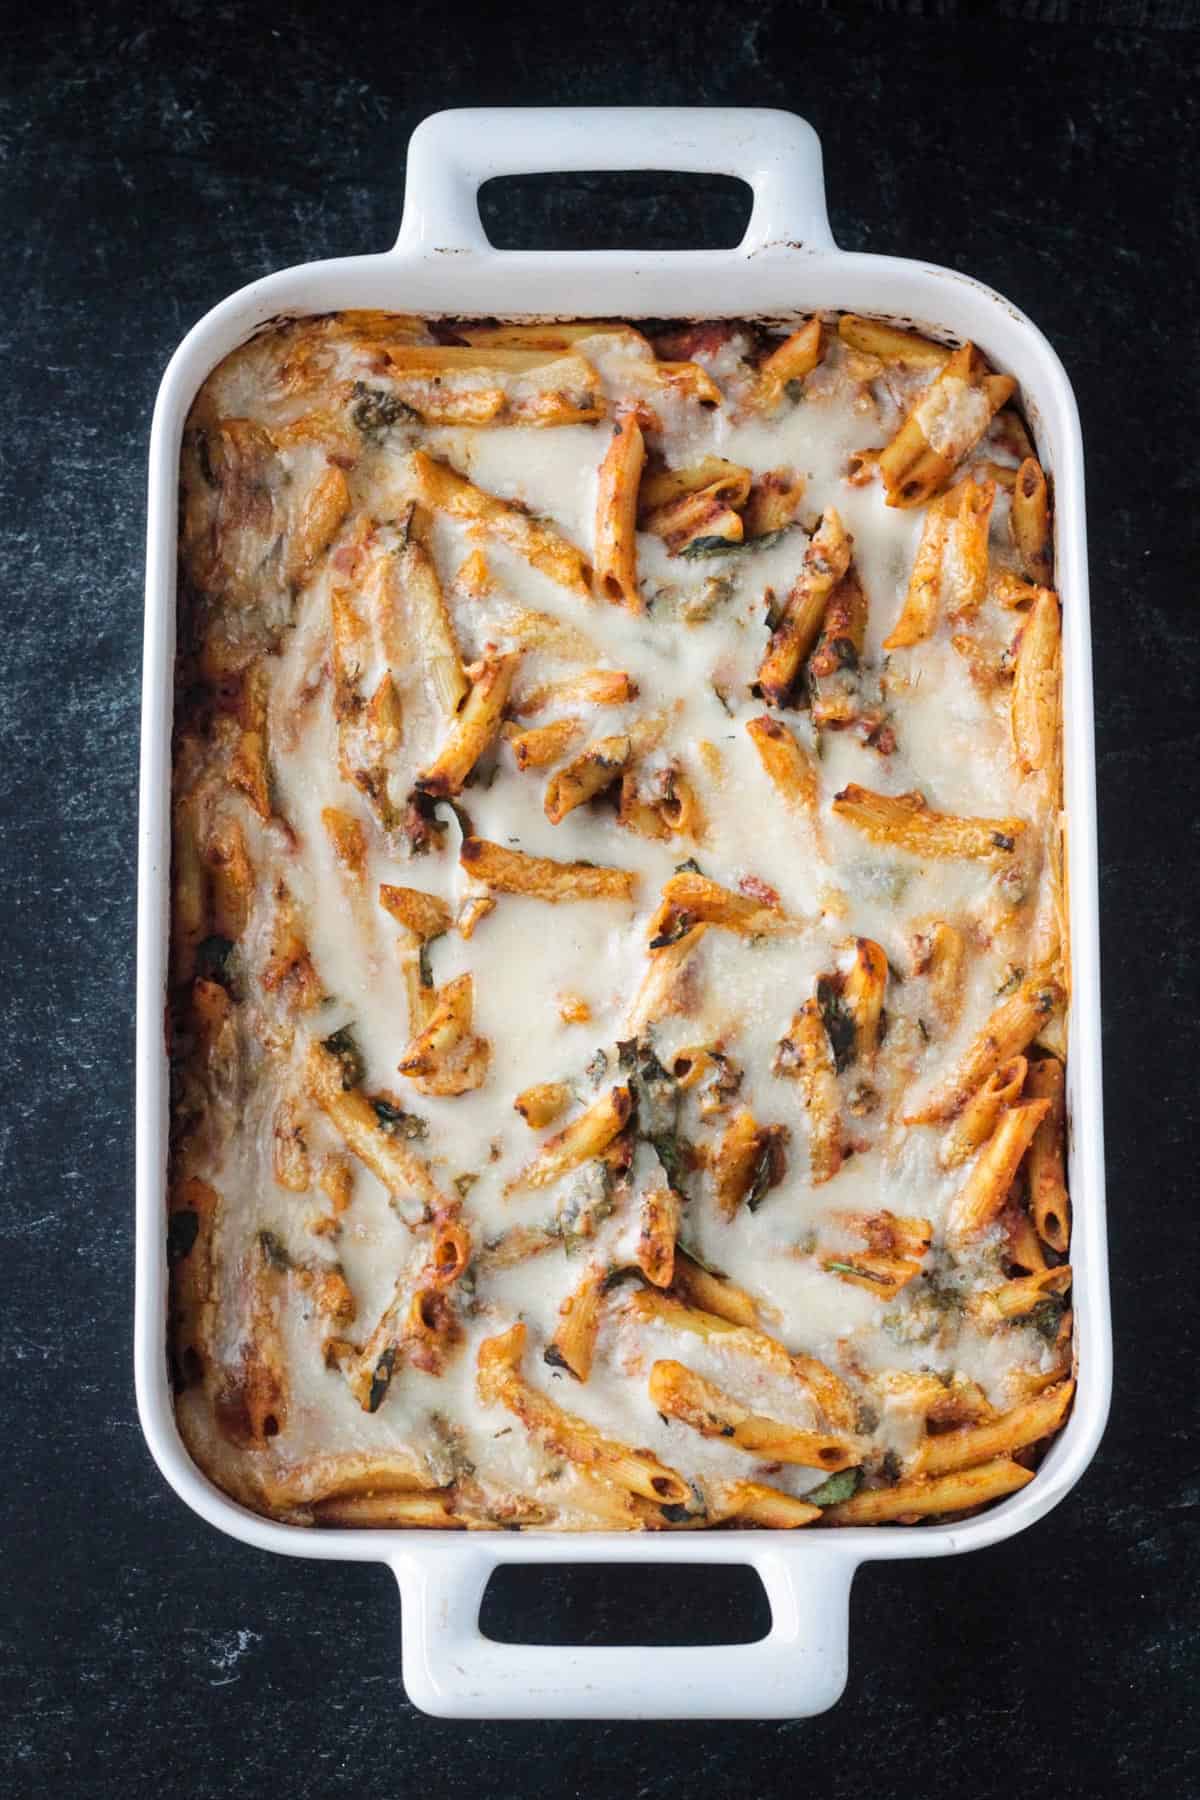 Vegan pasta baked right from the oven with melty cheese on top.